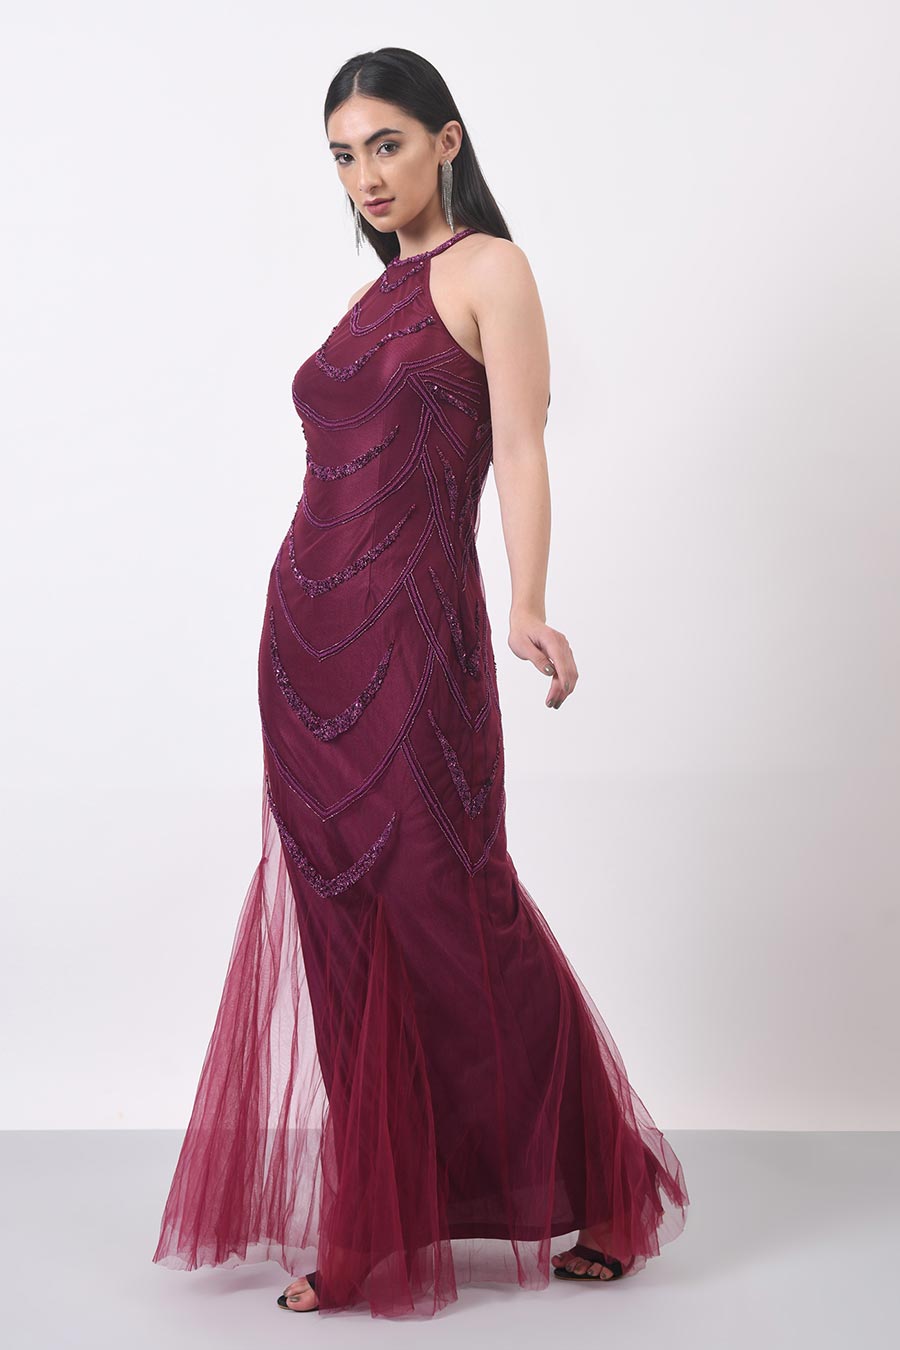 Wine Embellished Gown Dress